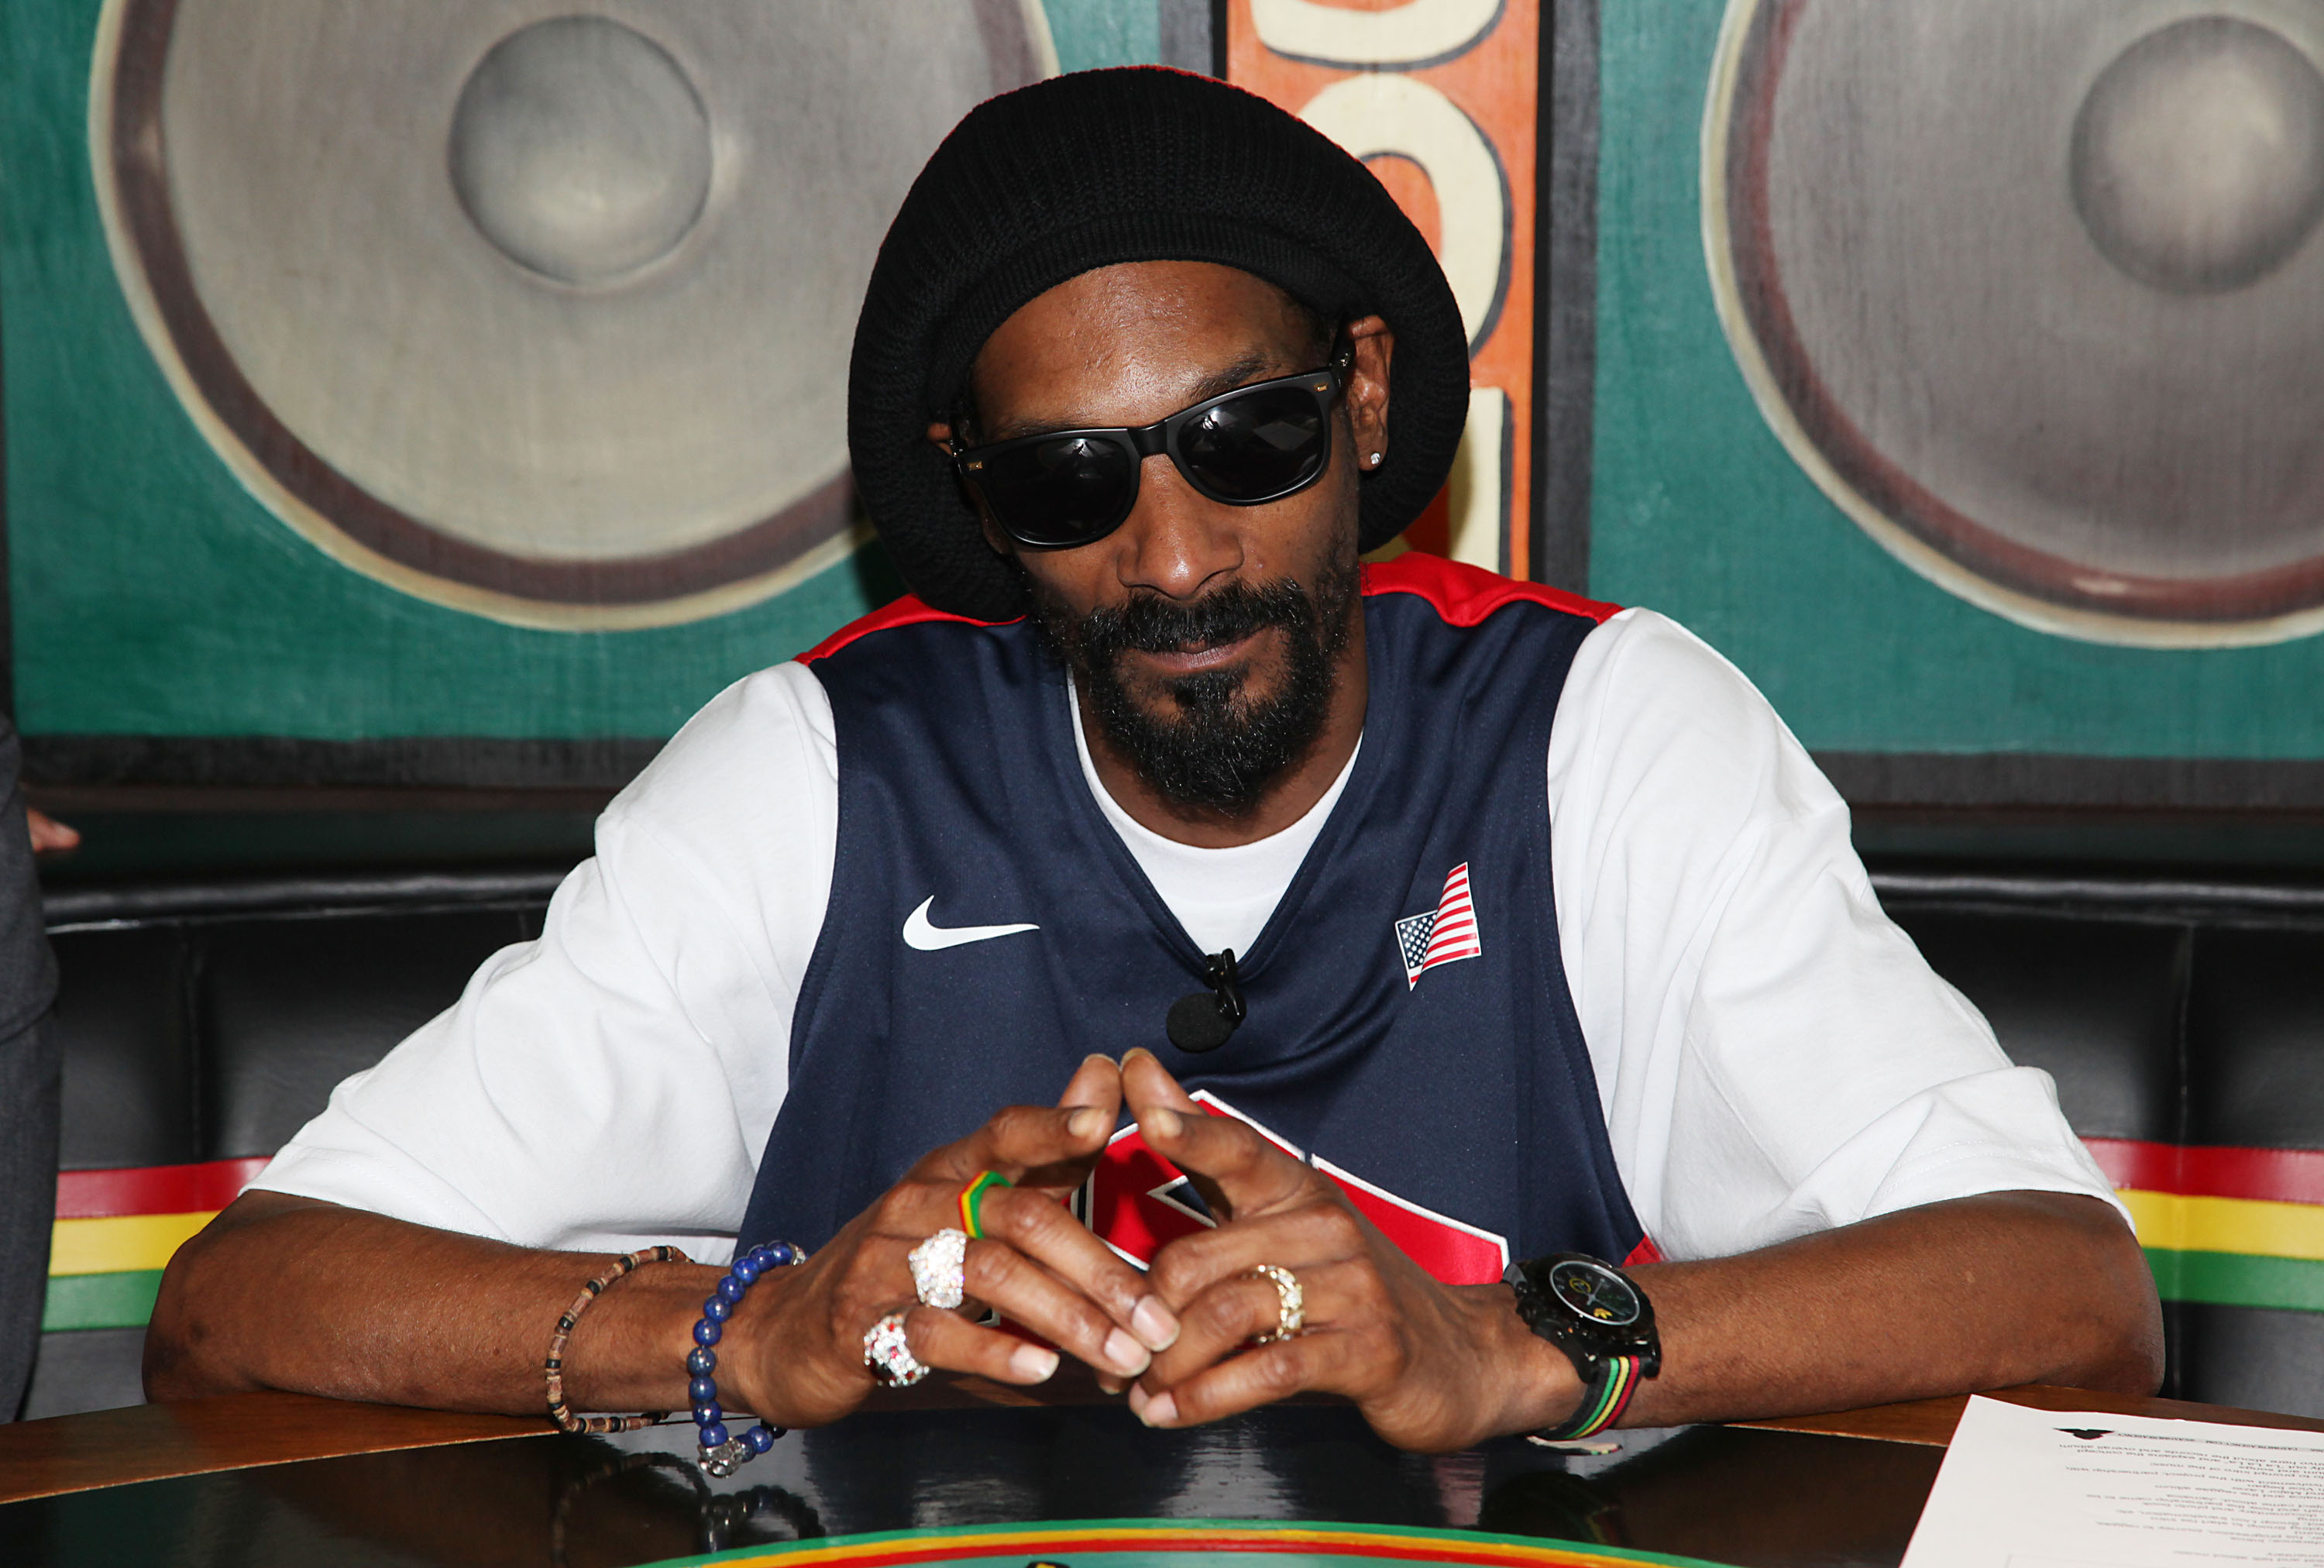 snoop dogg changes name to snoop lion